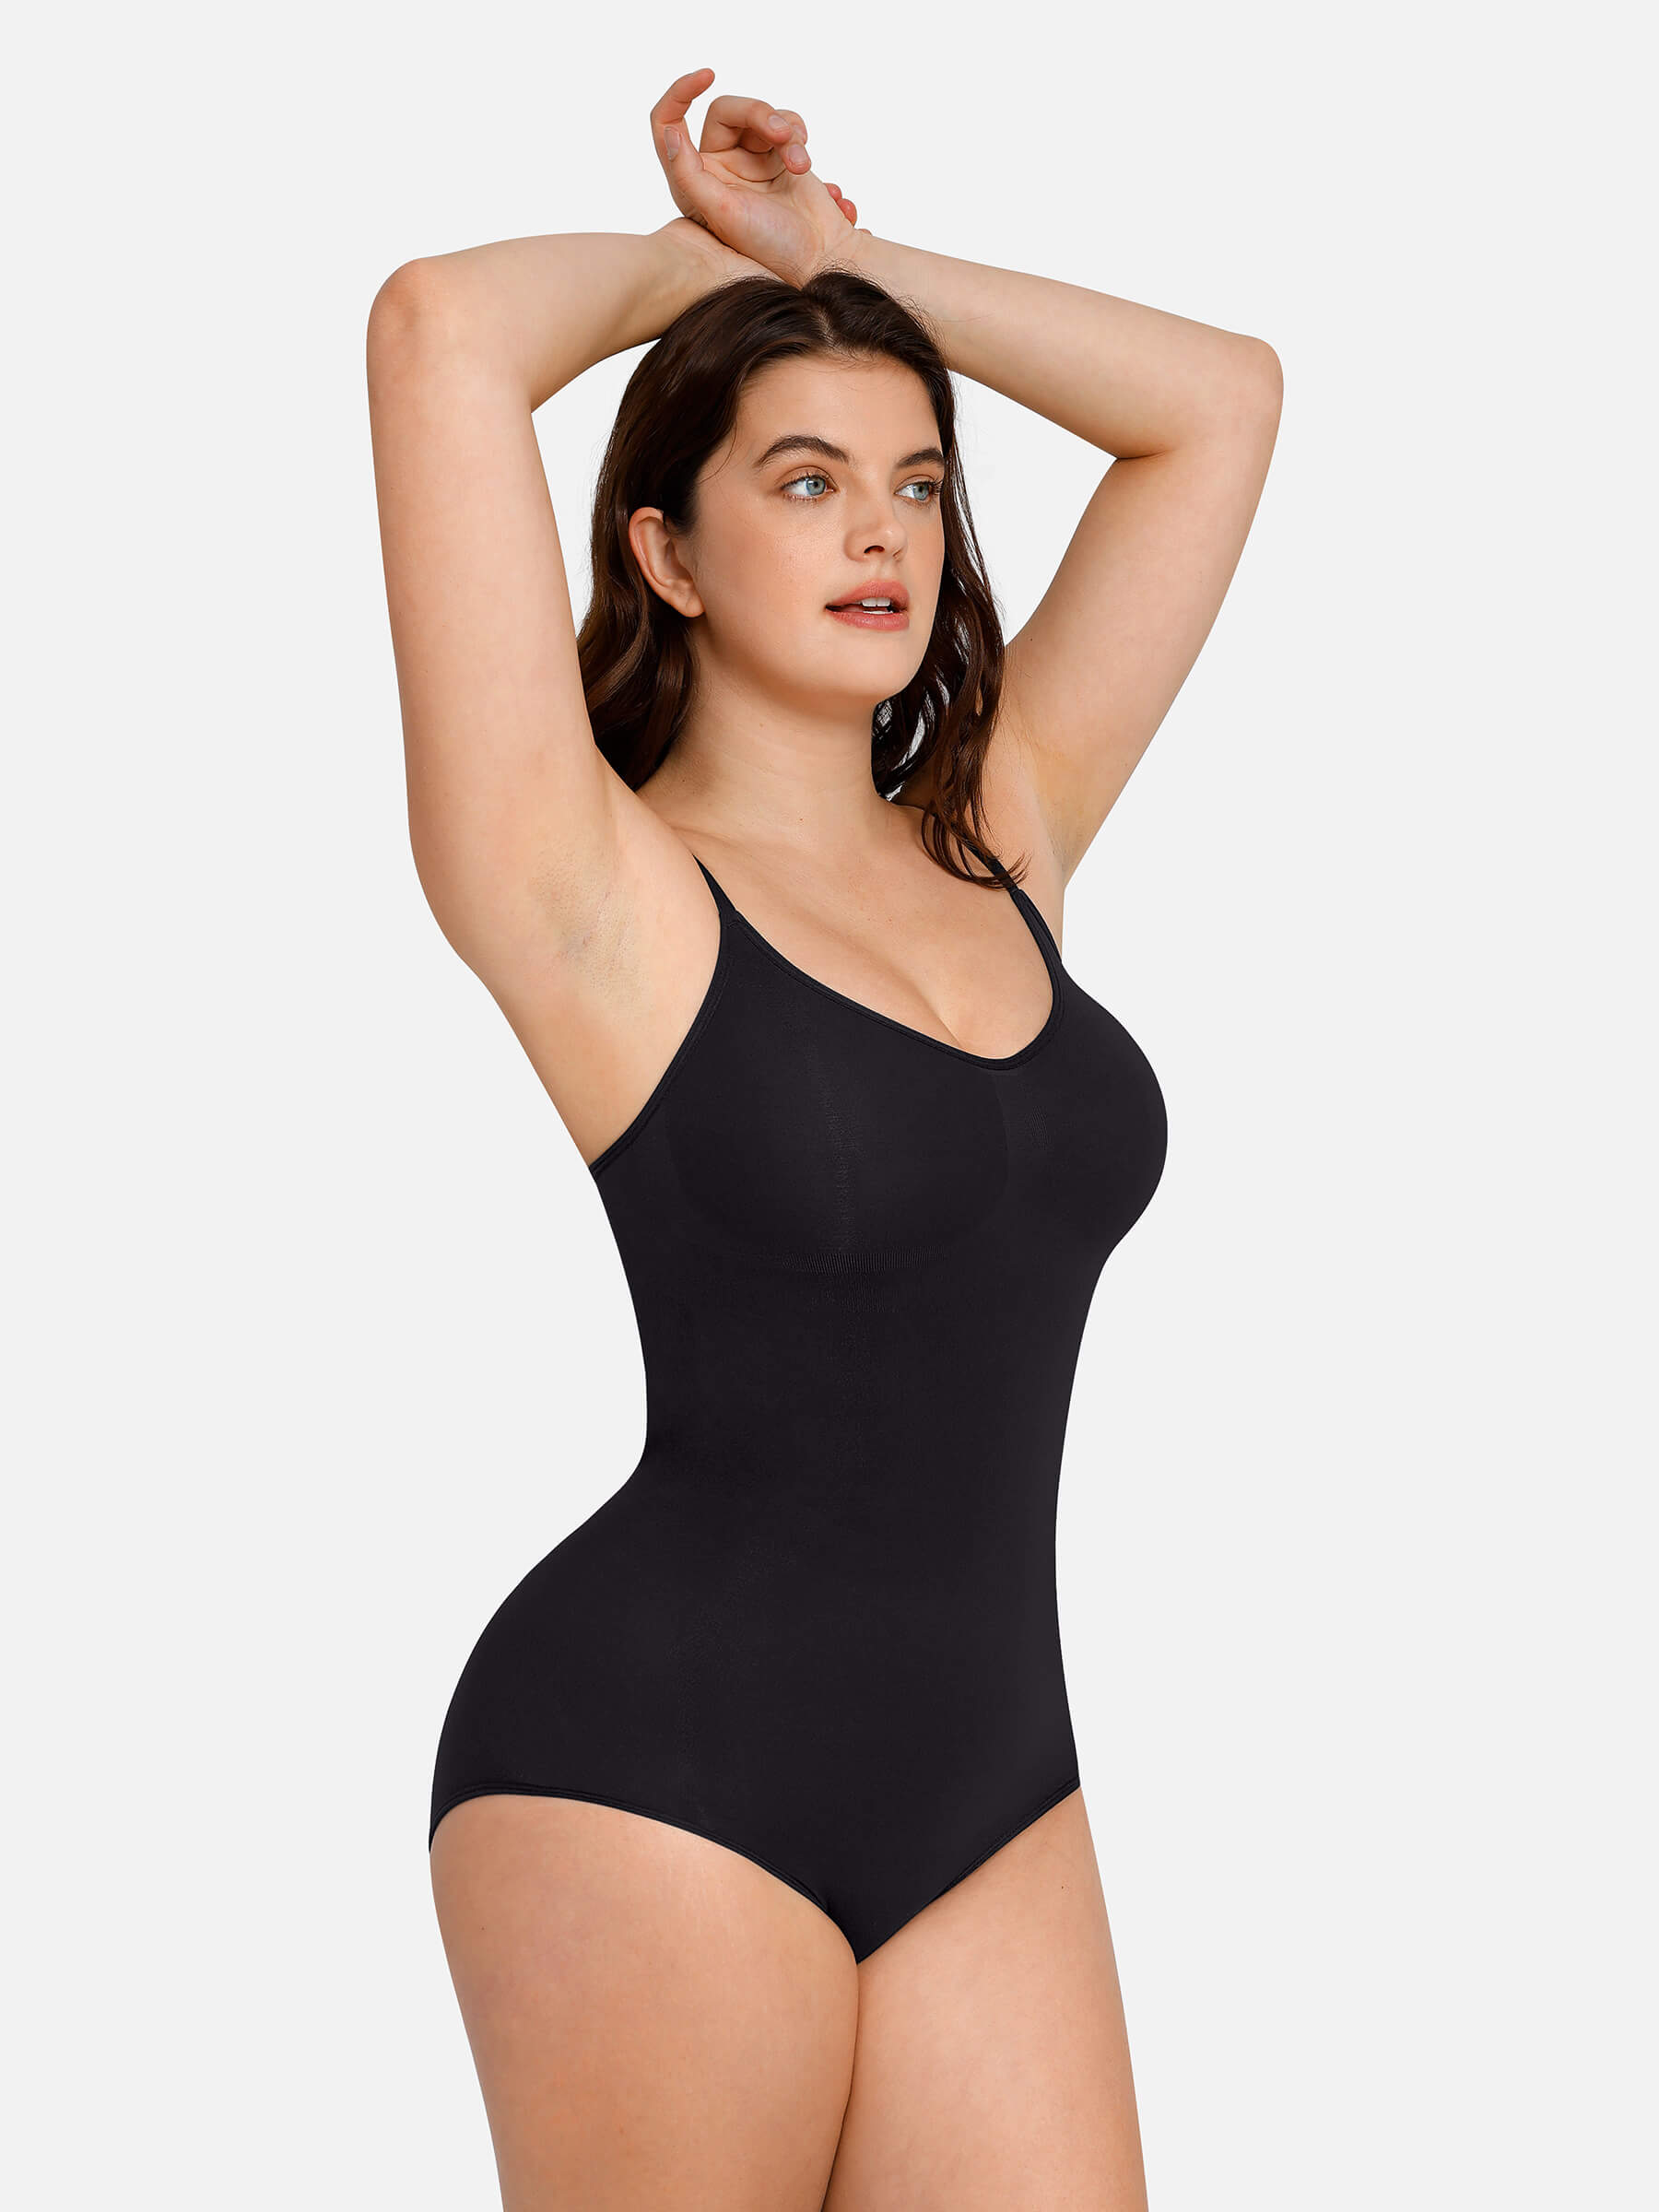 Sculpting Seamless Smoothing BodysuitFeelingirl Sculpting Seamless Smoothing Bodysuit